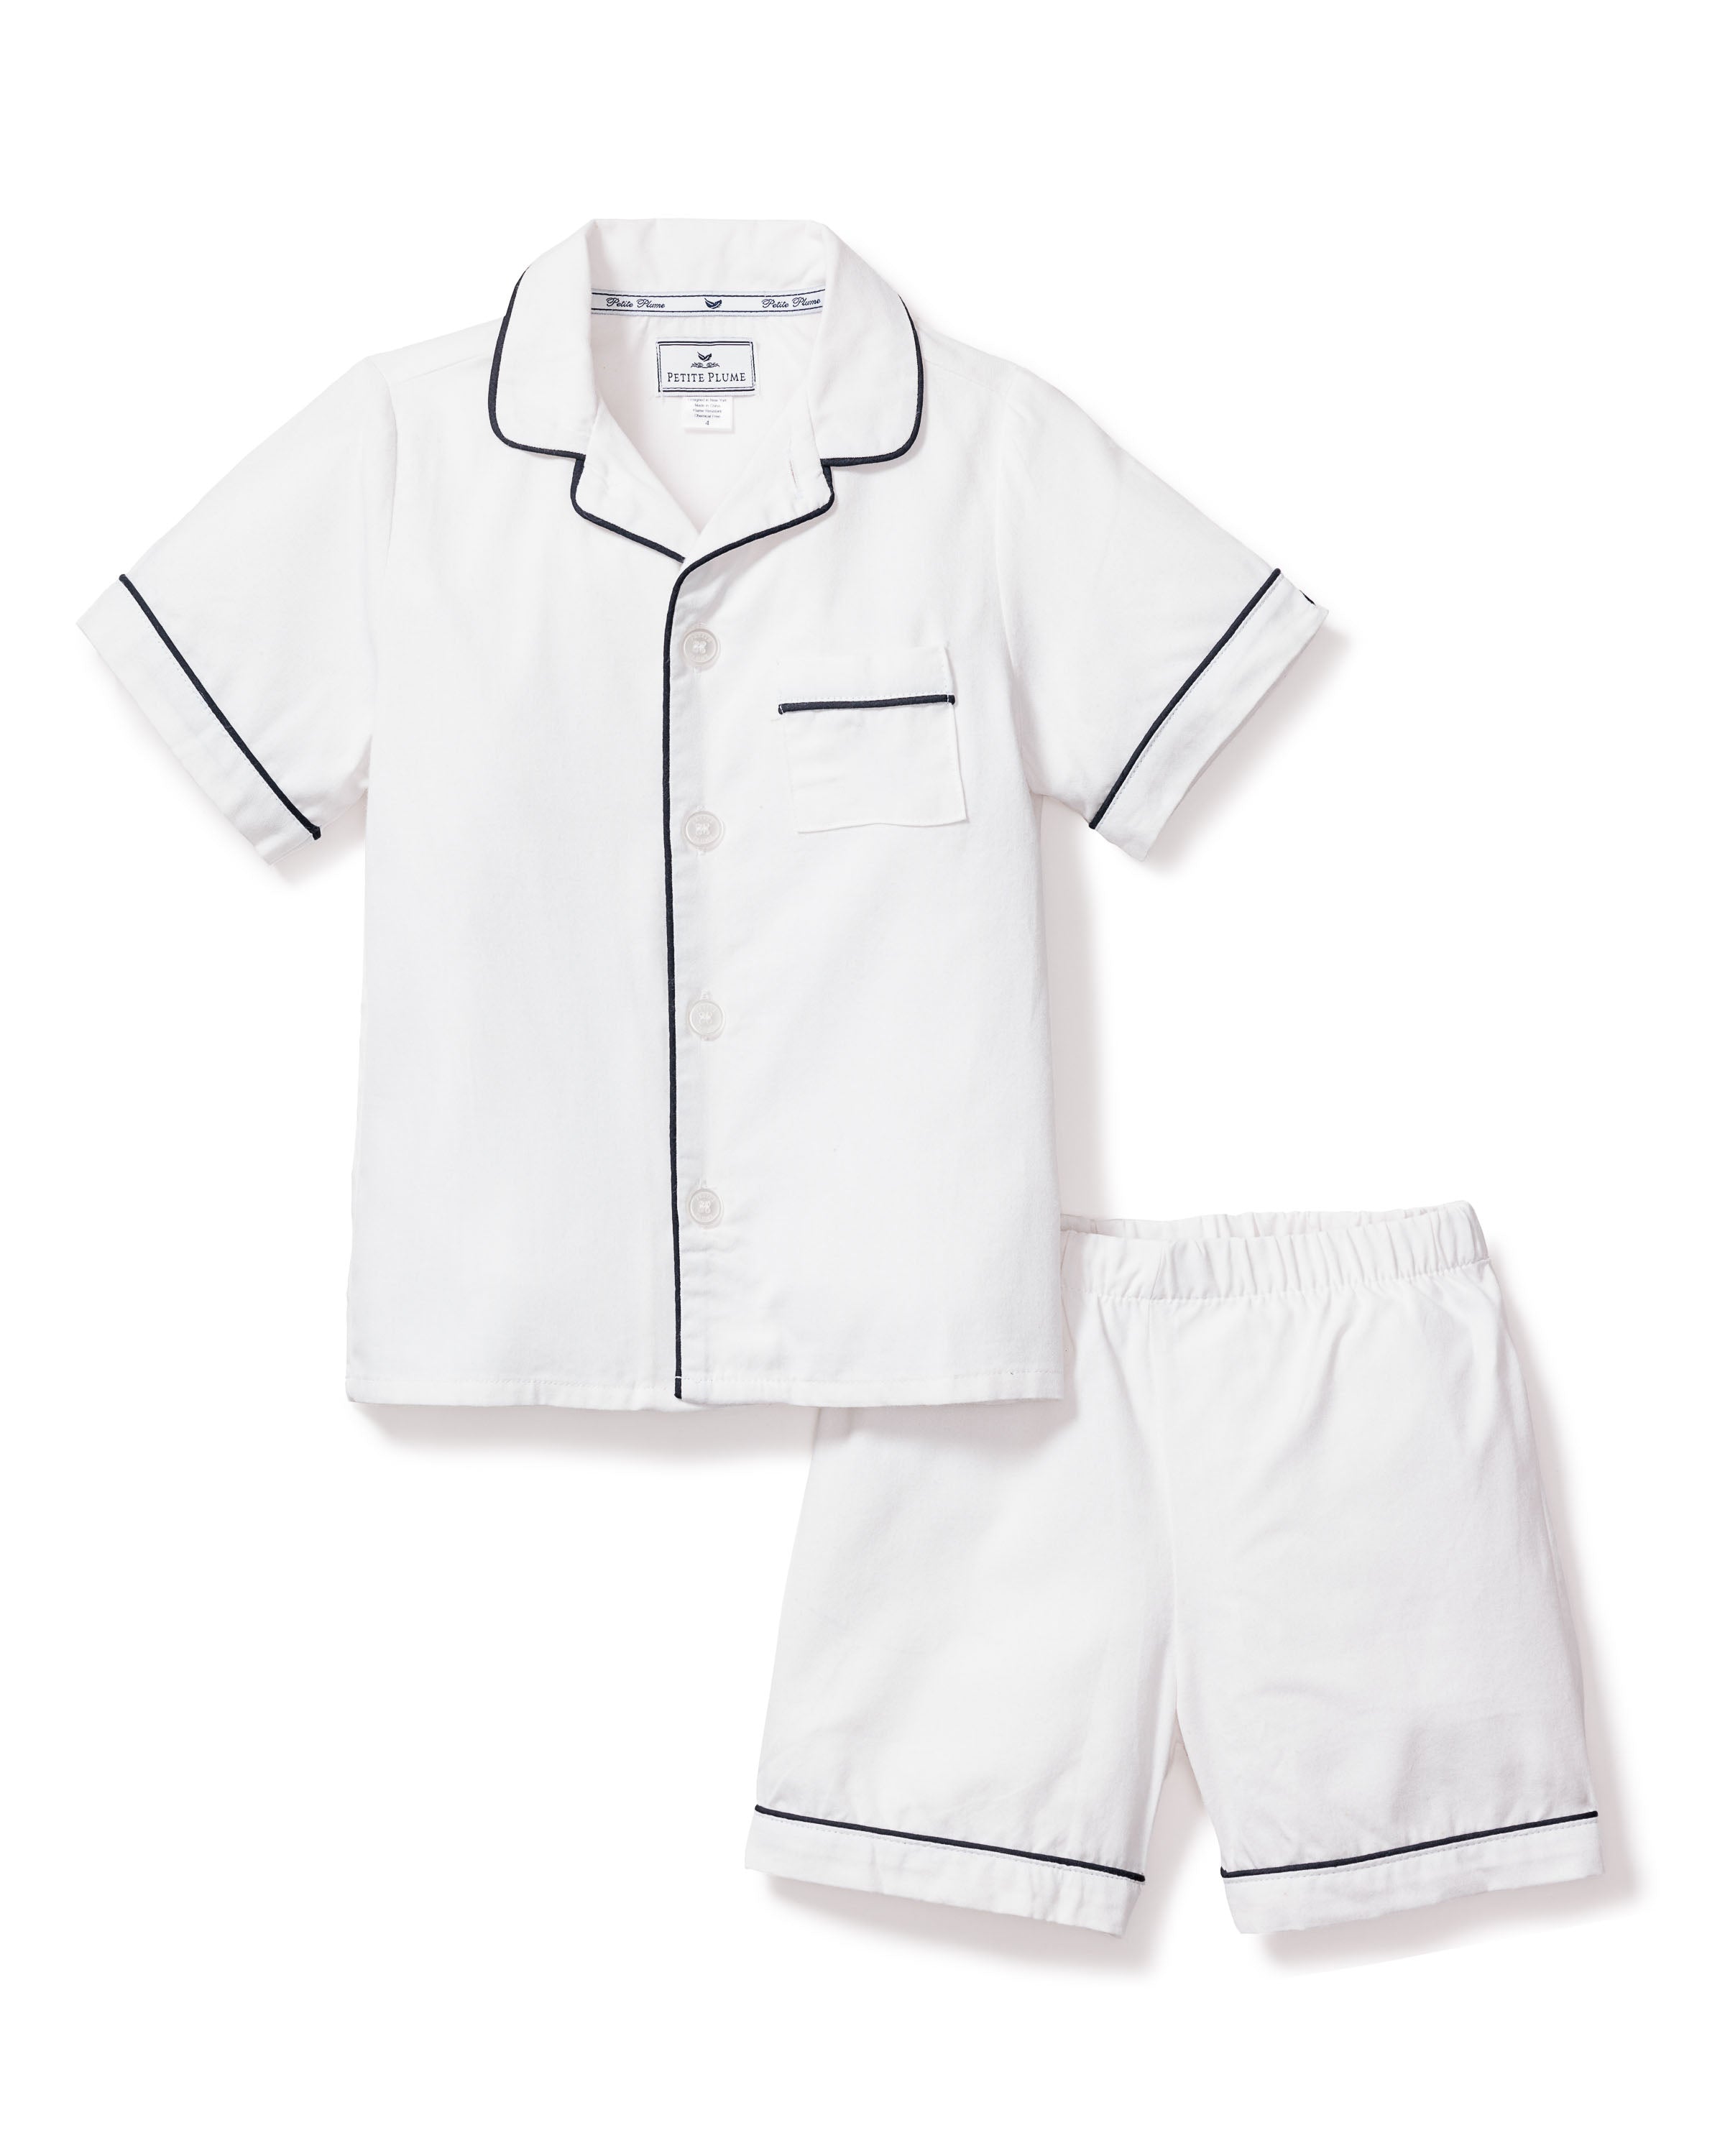 Kid's Twill Pajama Short Set in White with Navy Piping